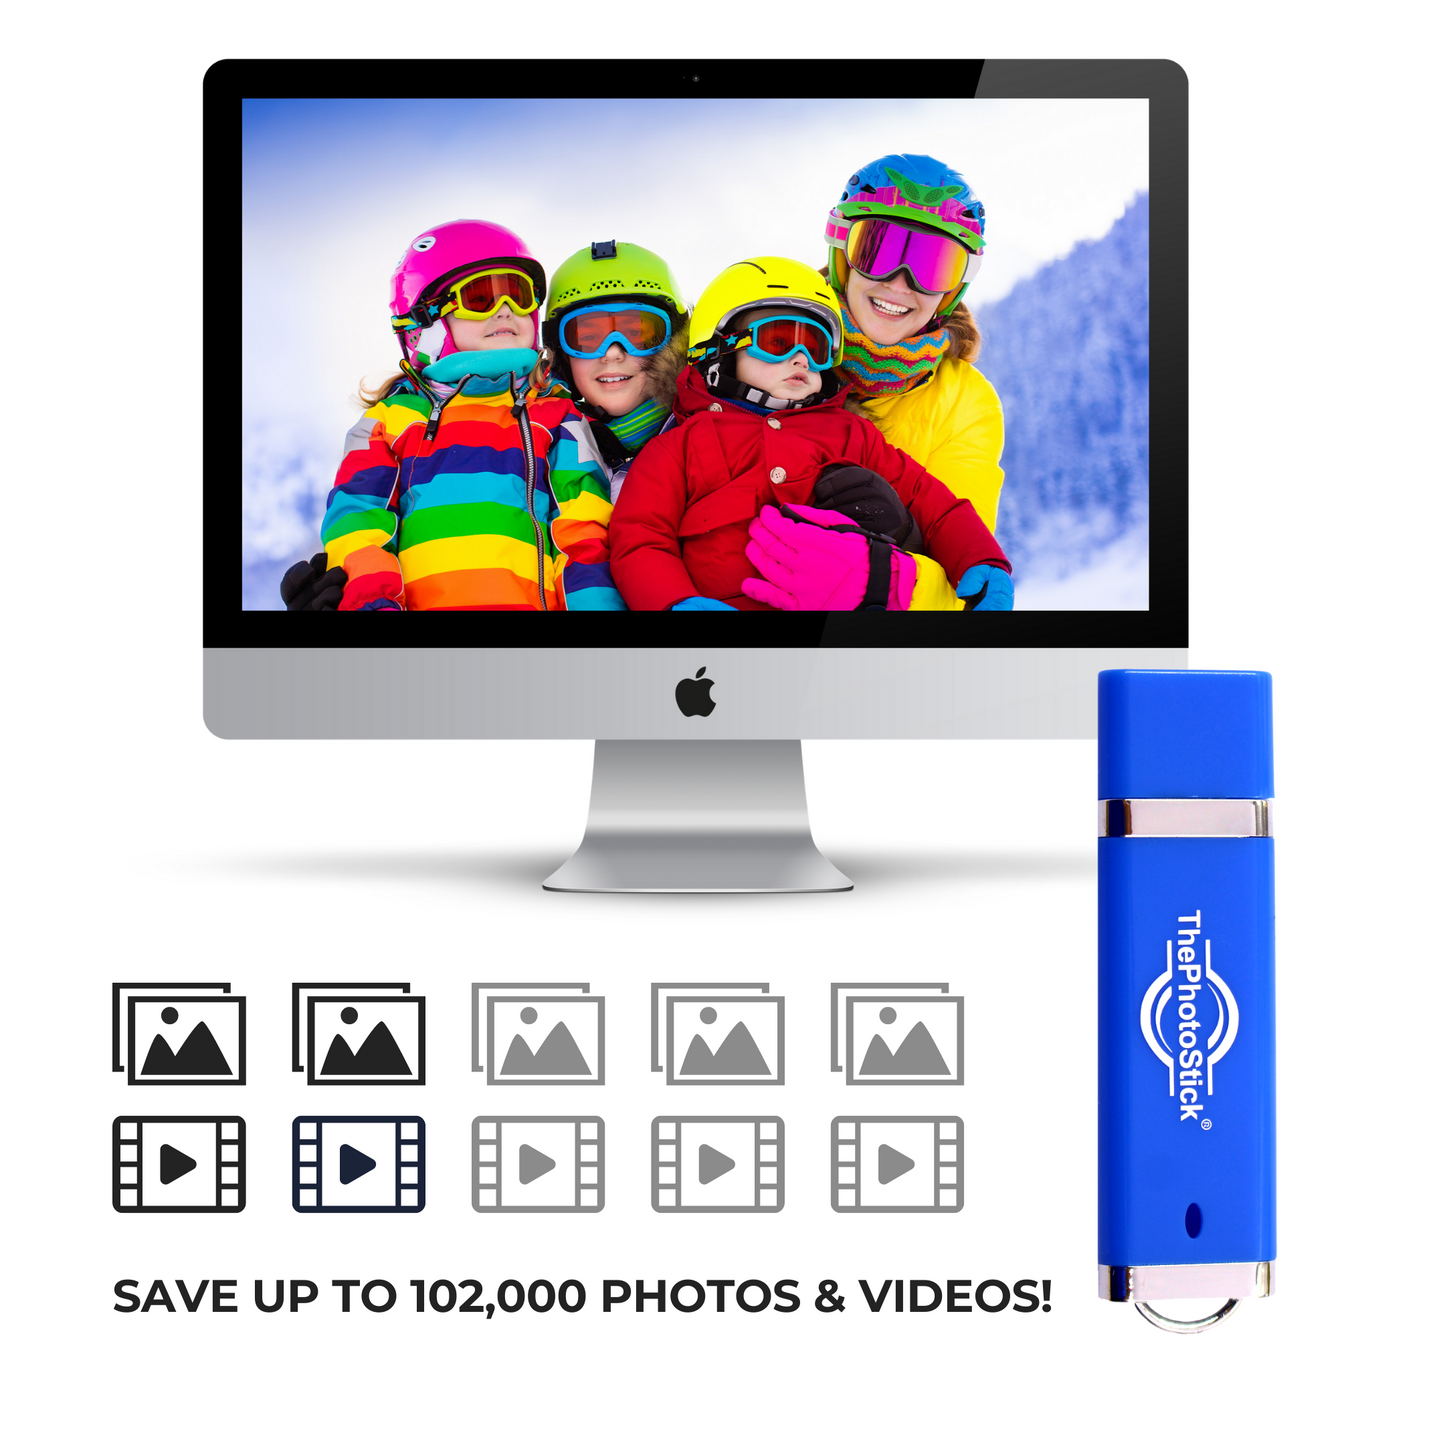 ThePhotoStick® 256 GB for PC and Mac